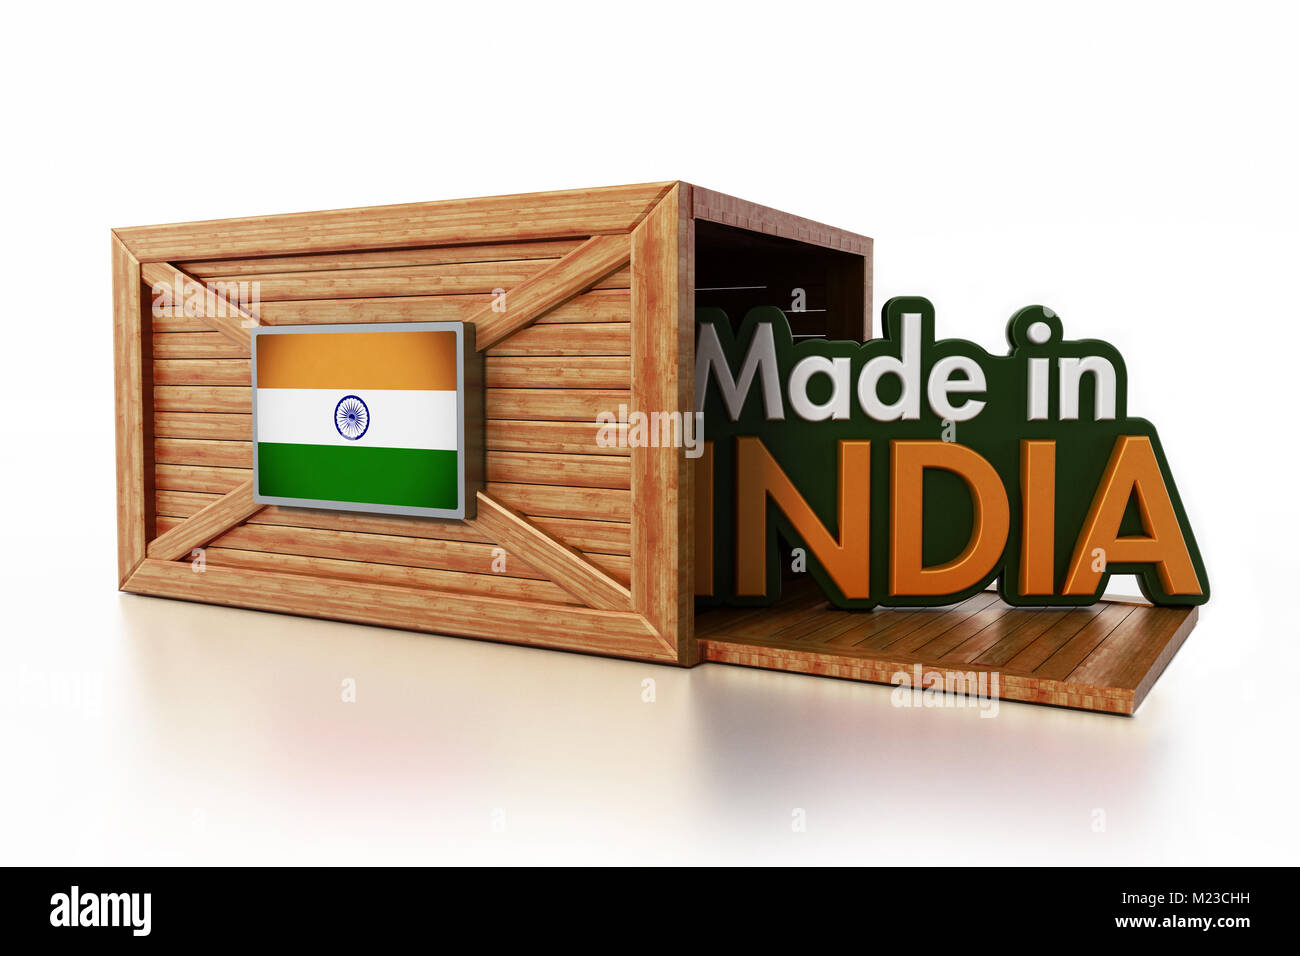 Made in India text inside cargo box with Indian flag. 3D illustration. Stock Photo